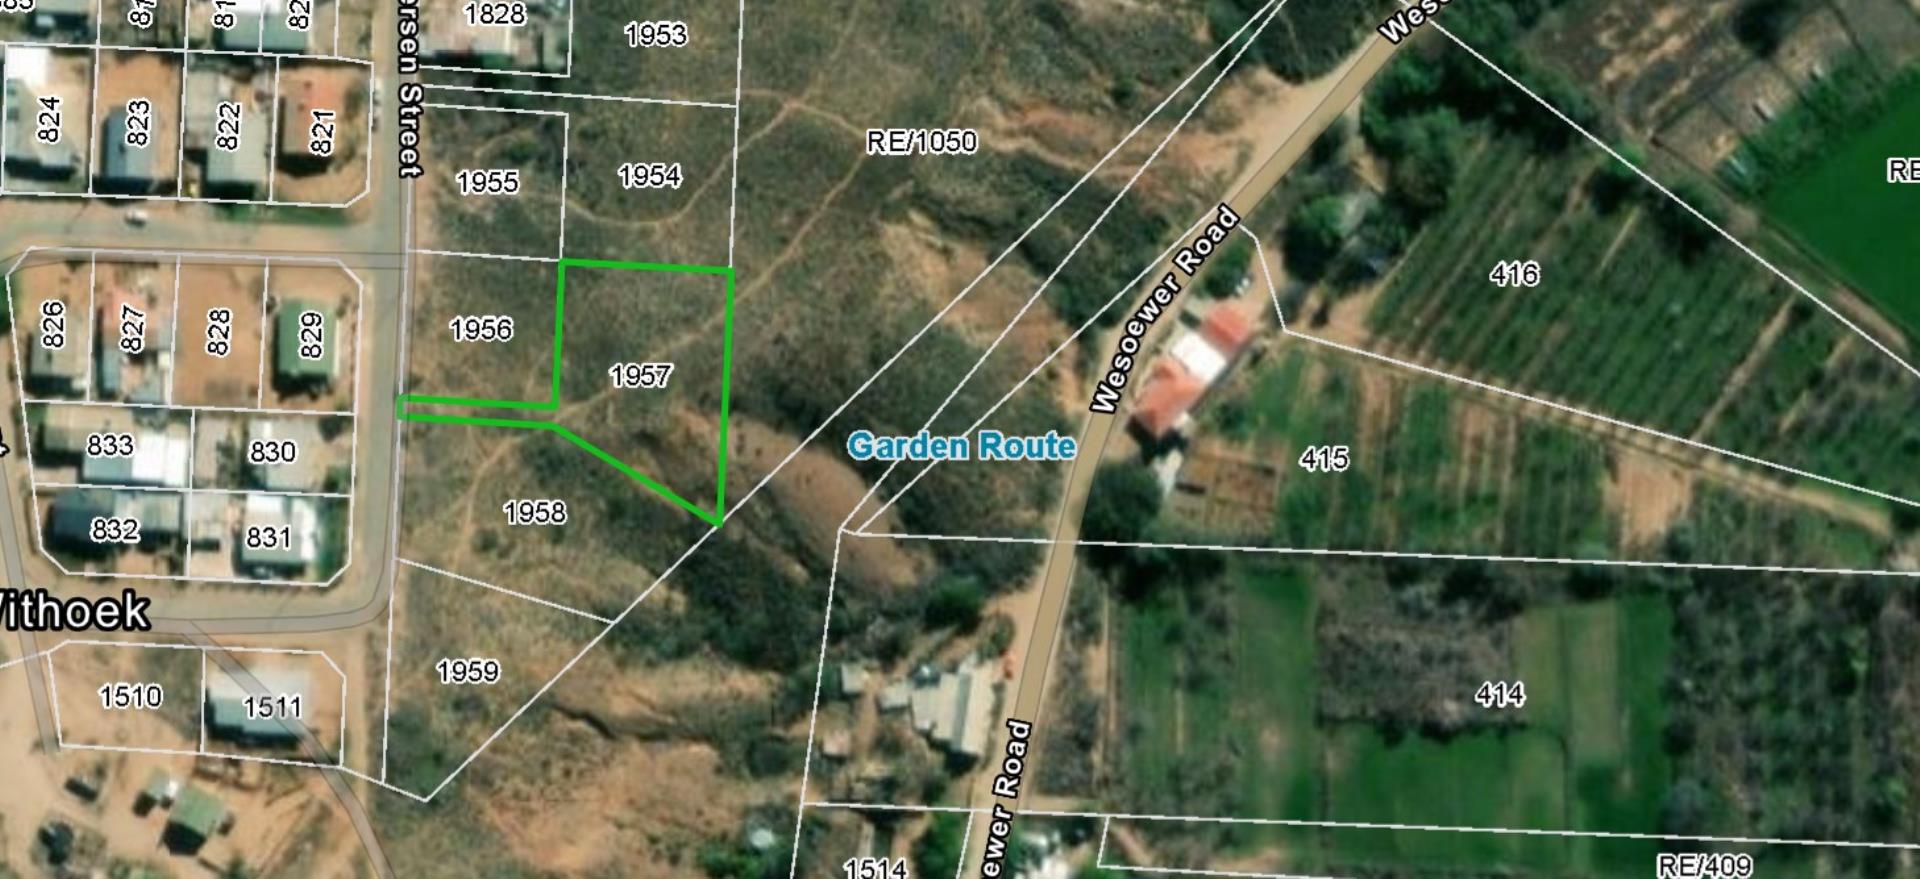 Vacant Land for Sale - Western Cape